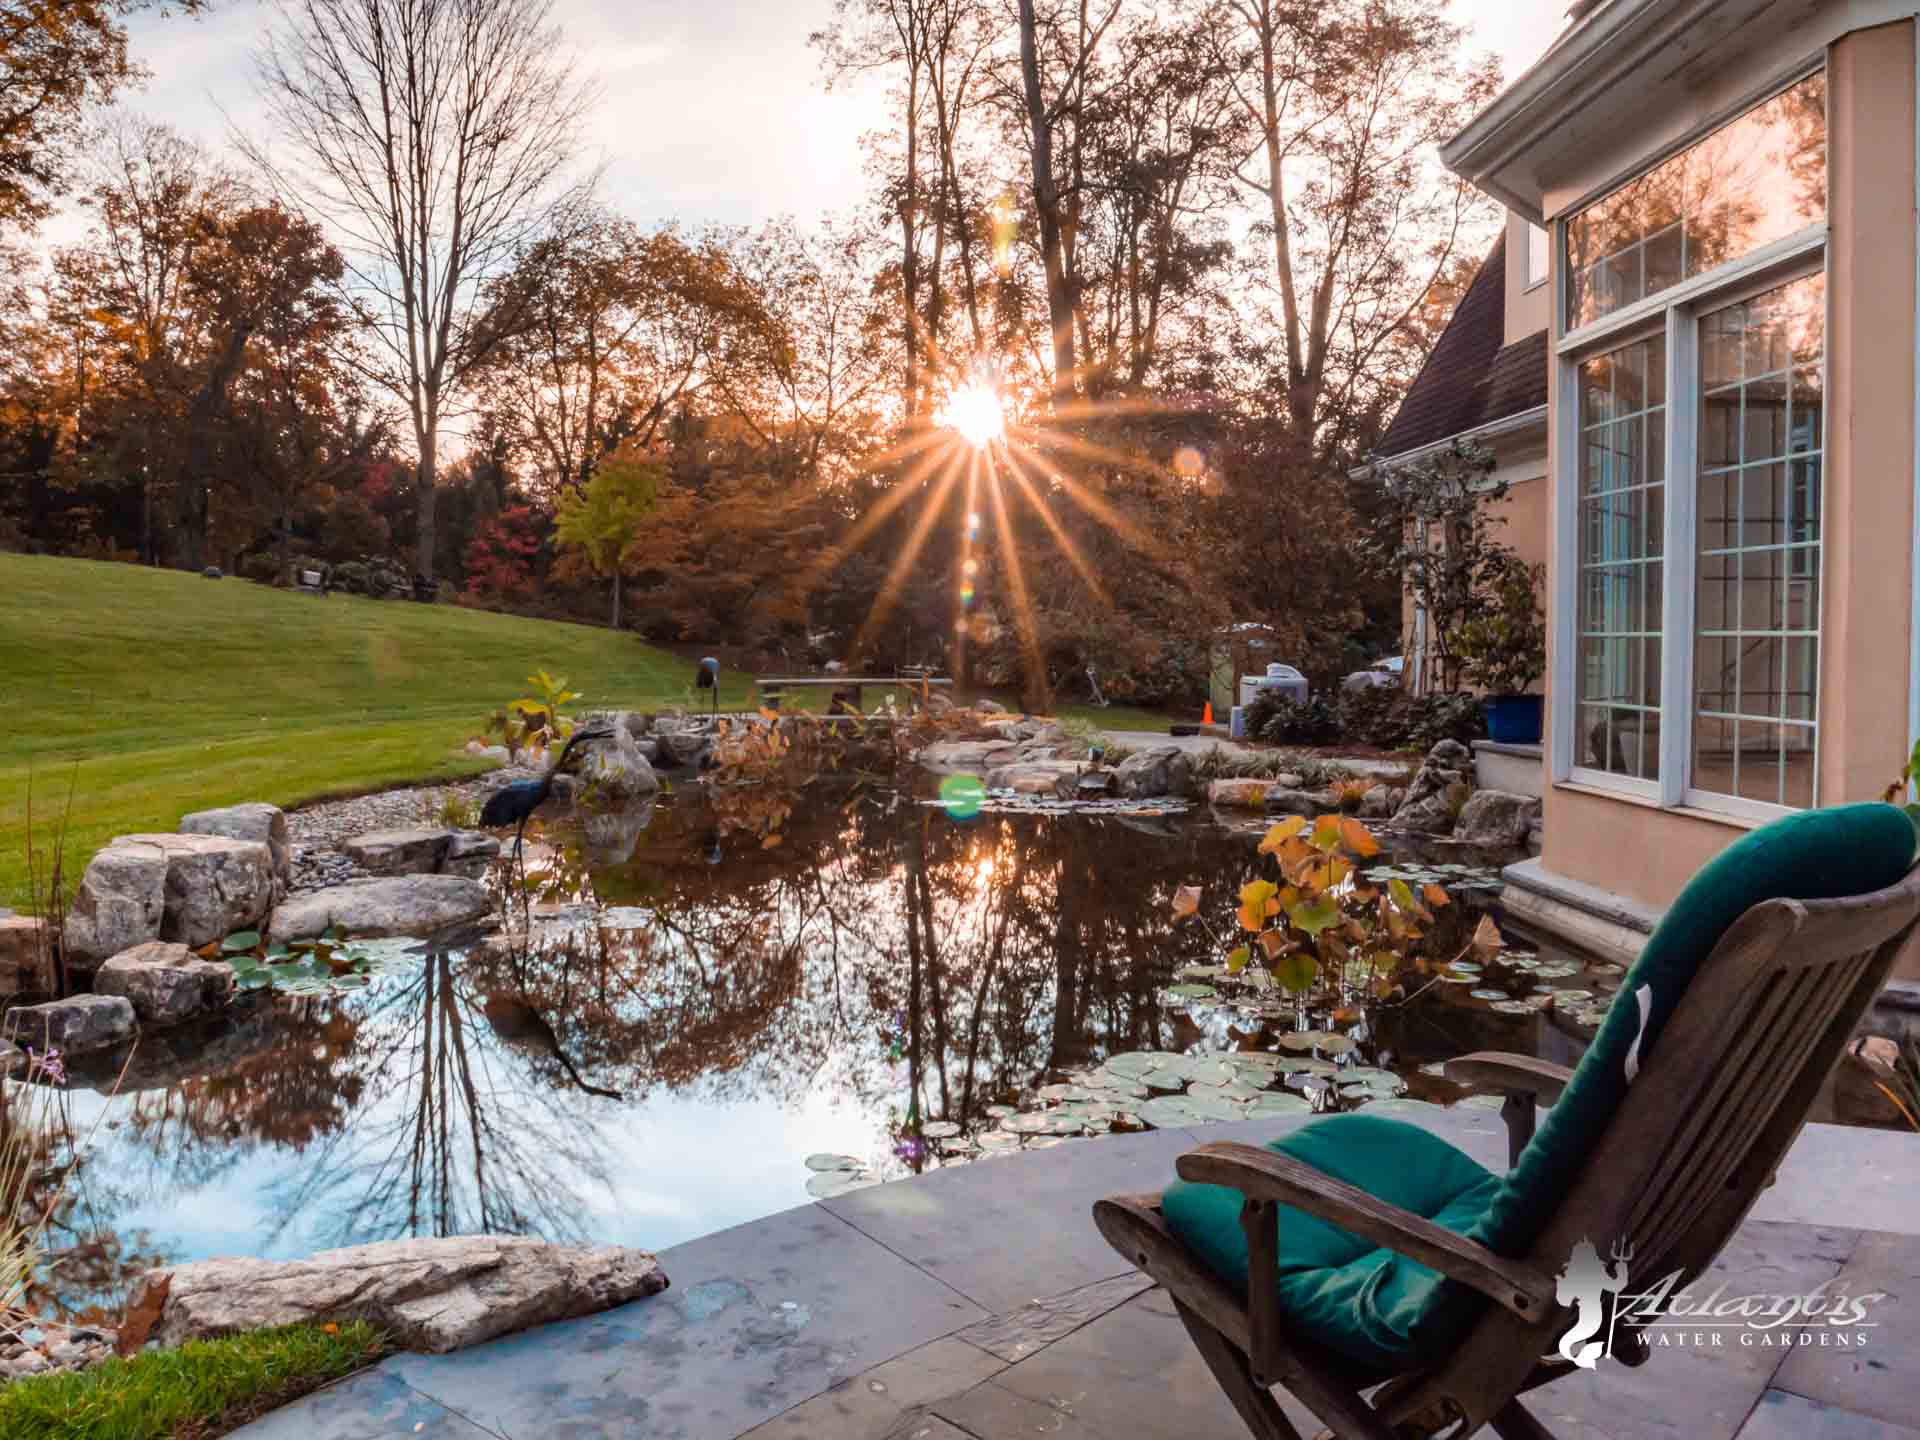 A serene backyard with a natural pond reflecting the sunset, surrounded by stonework and plants. There is a green cushioned chair on a stone patio next to a house with large windows